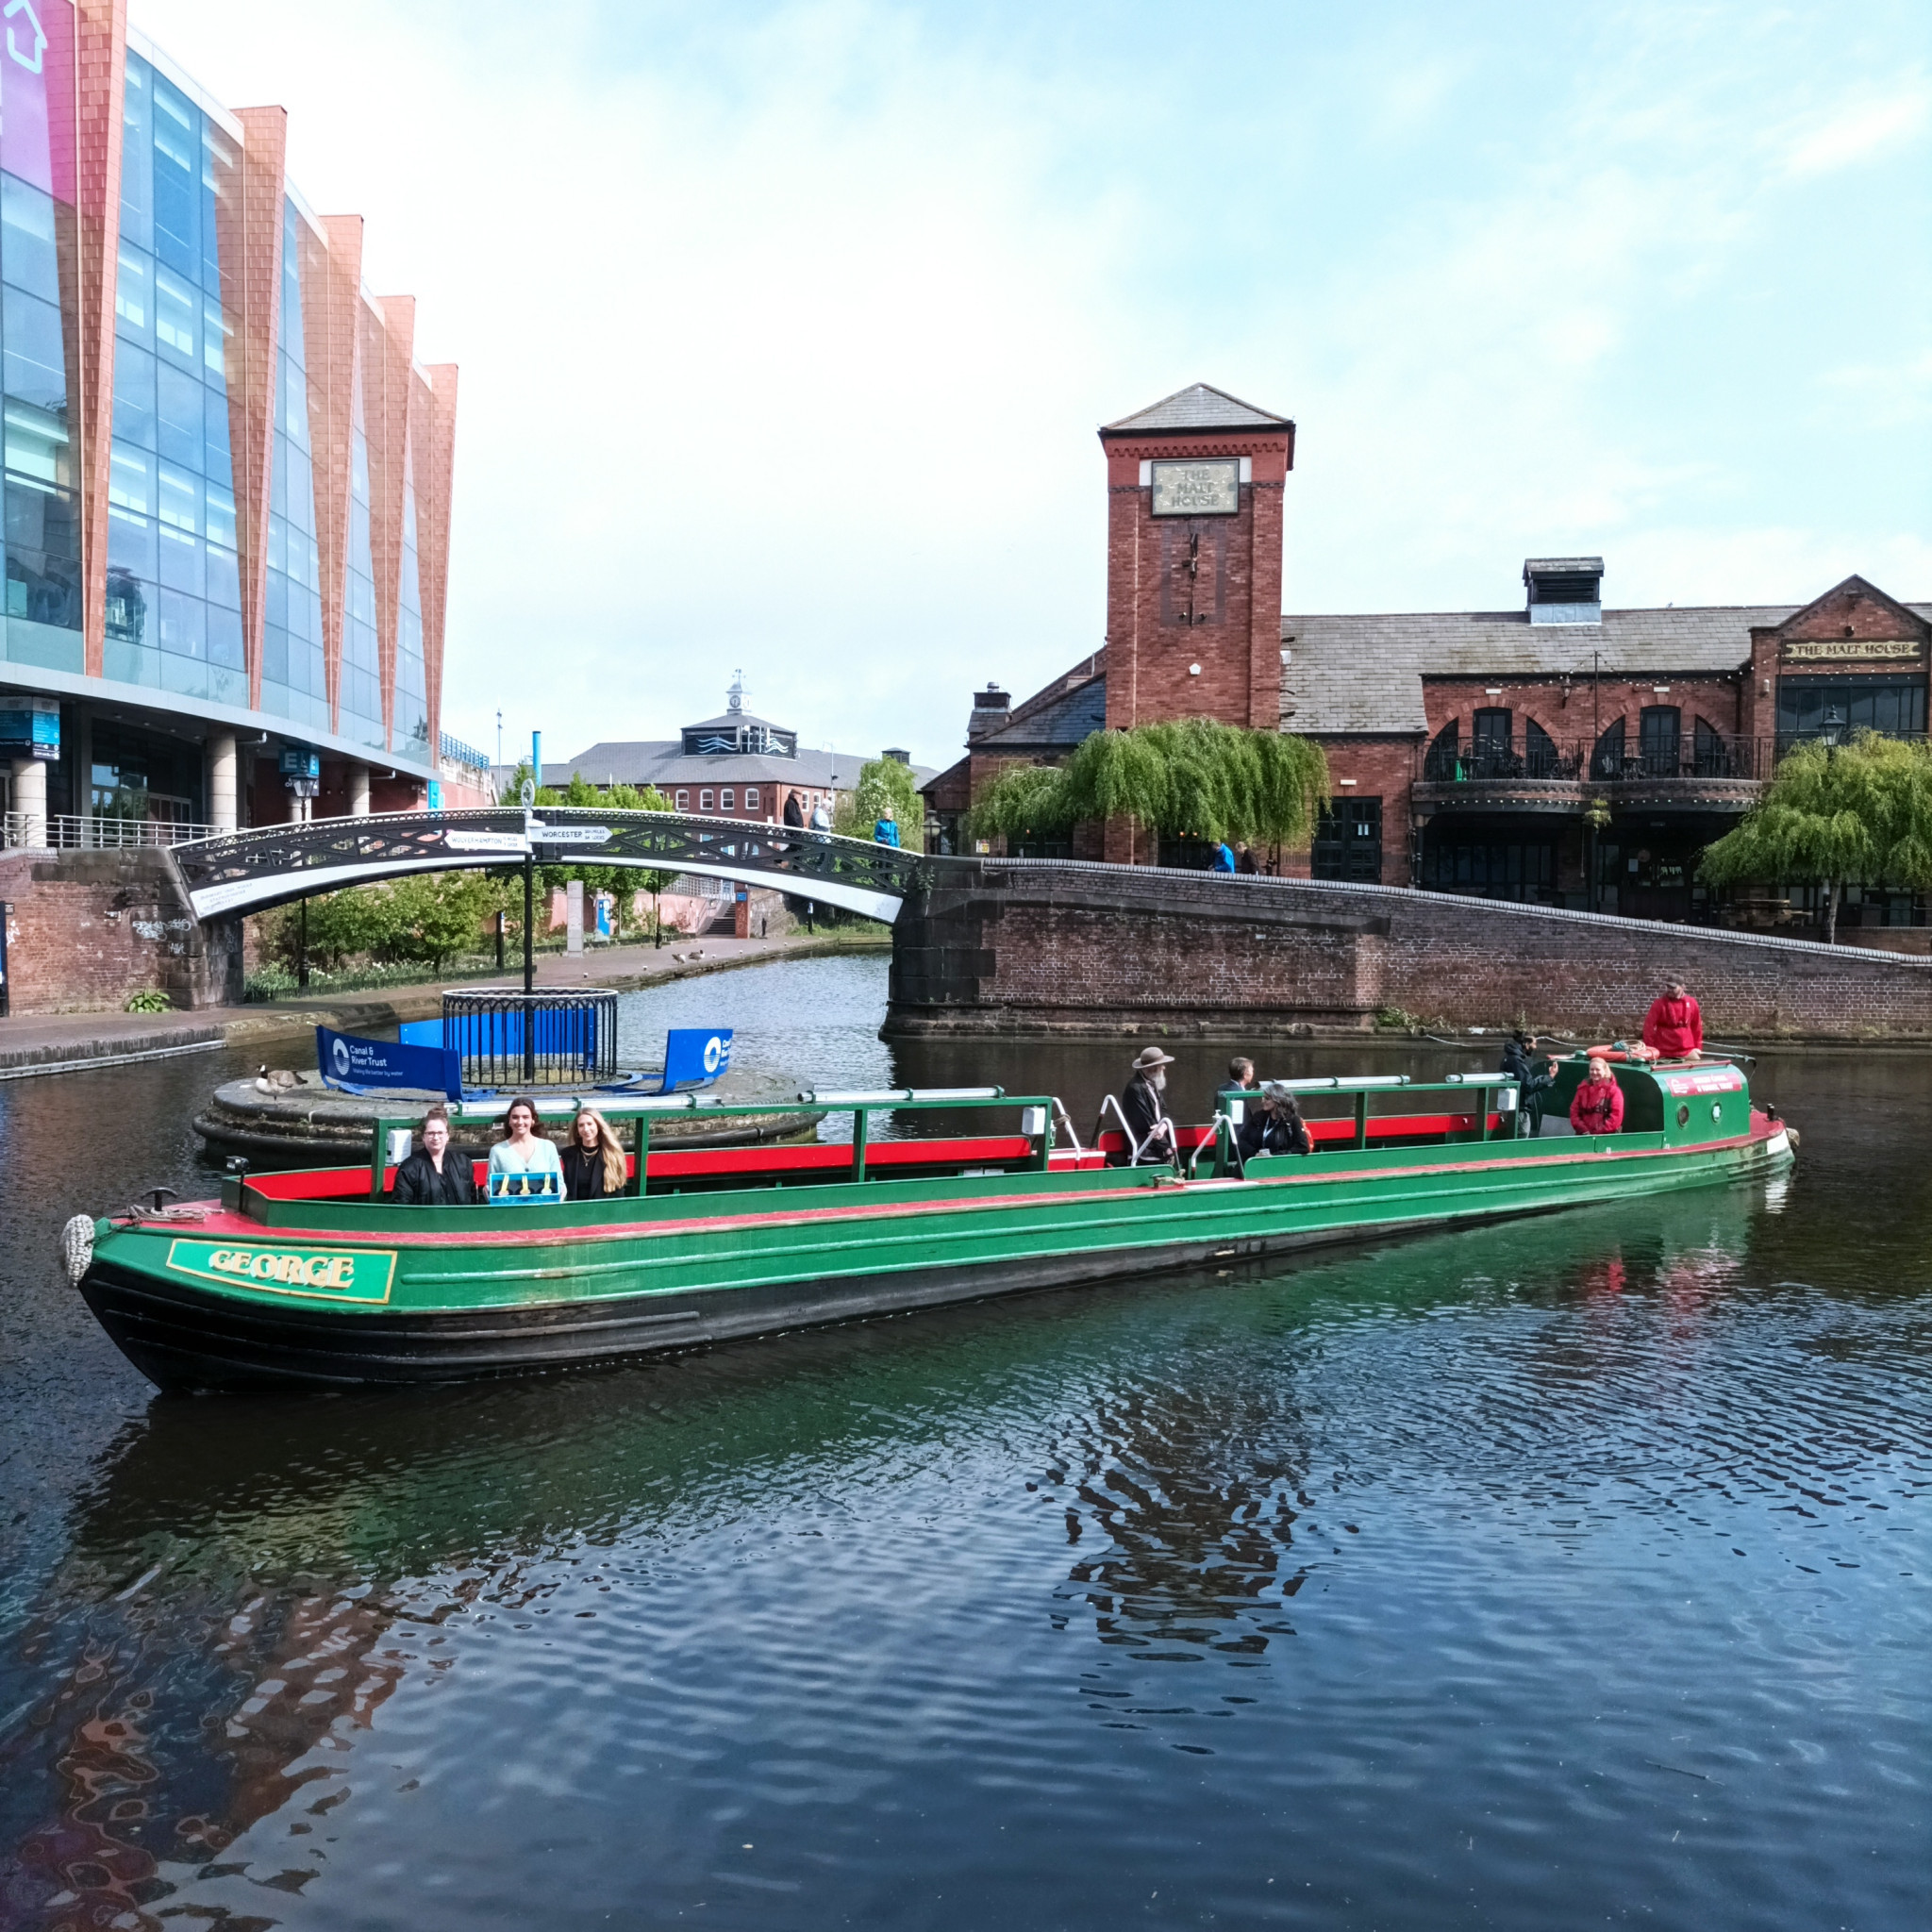 The Birmingham 2022 medals were displayed as a narrowboat navigated the waterways of Birmingham ©ITG